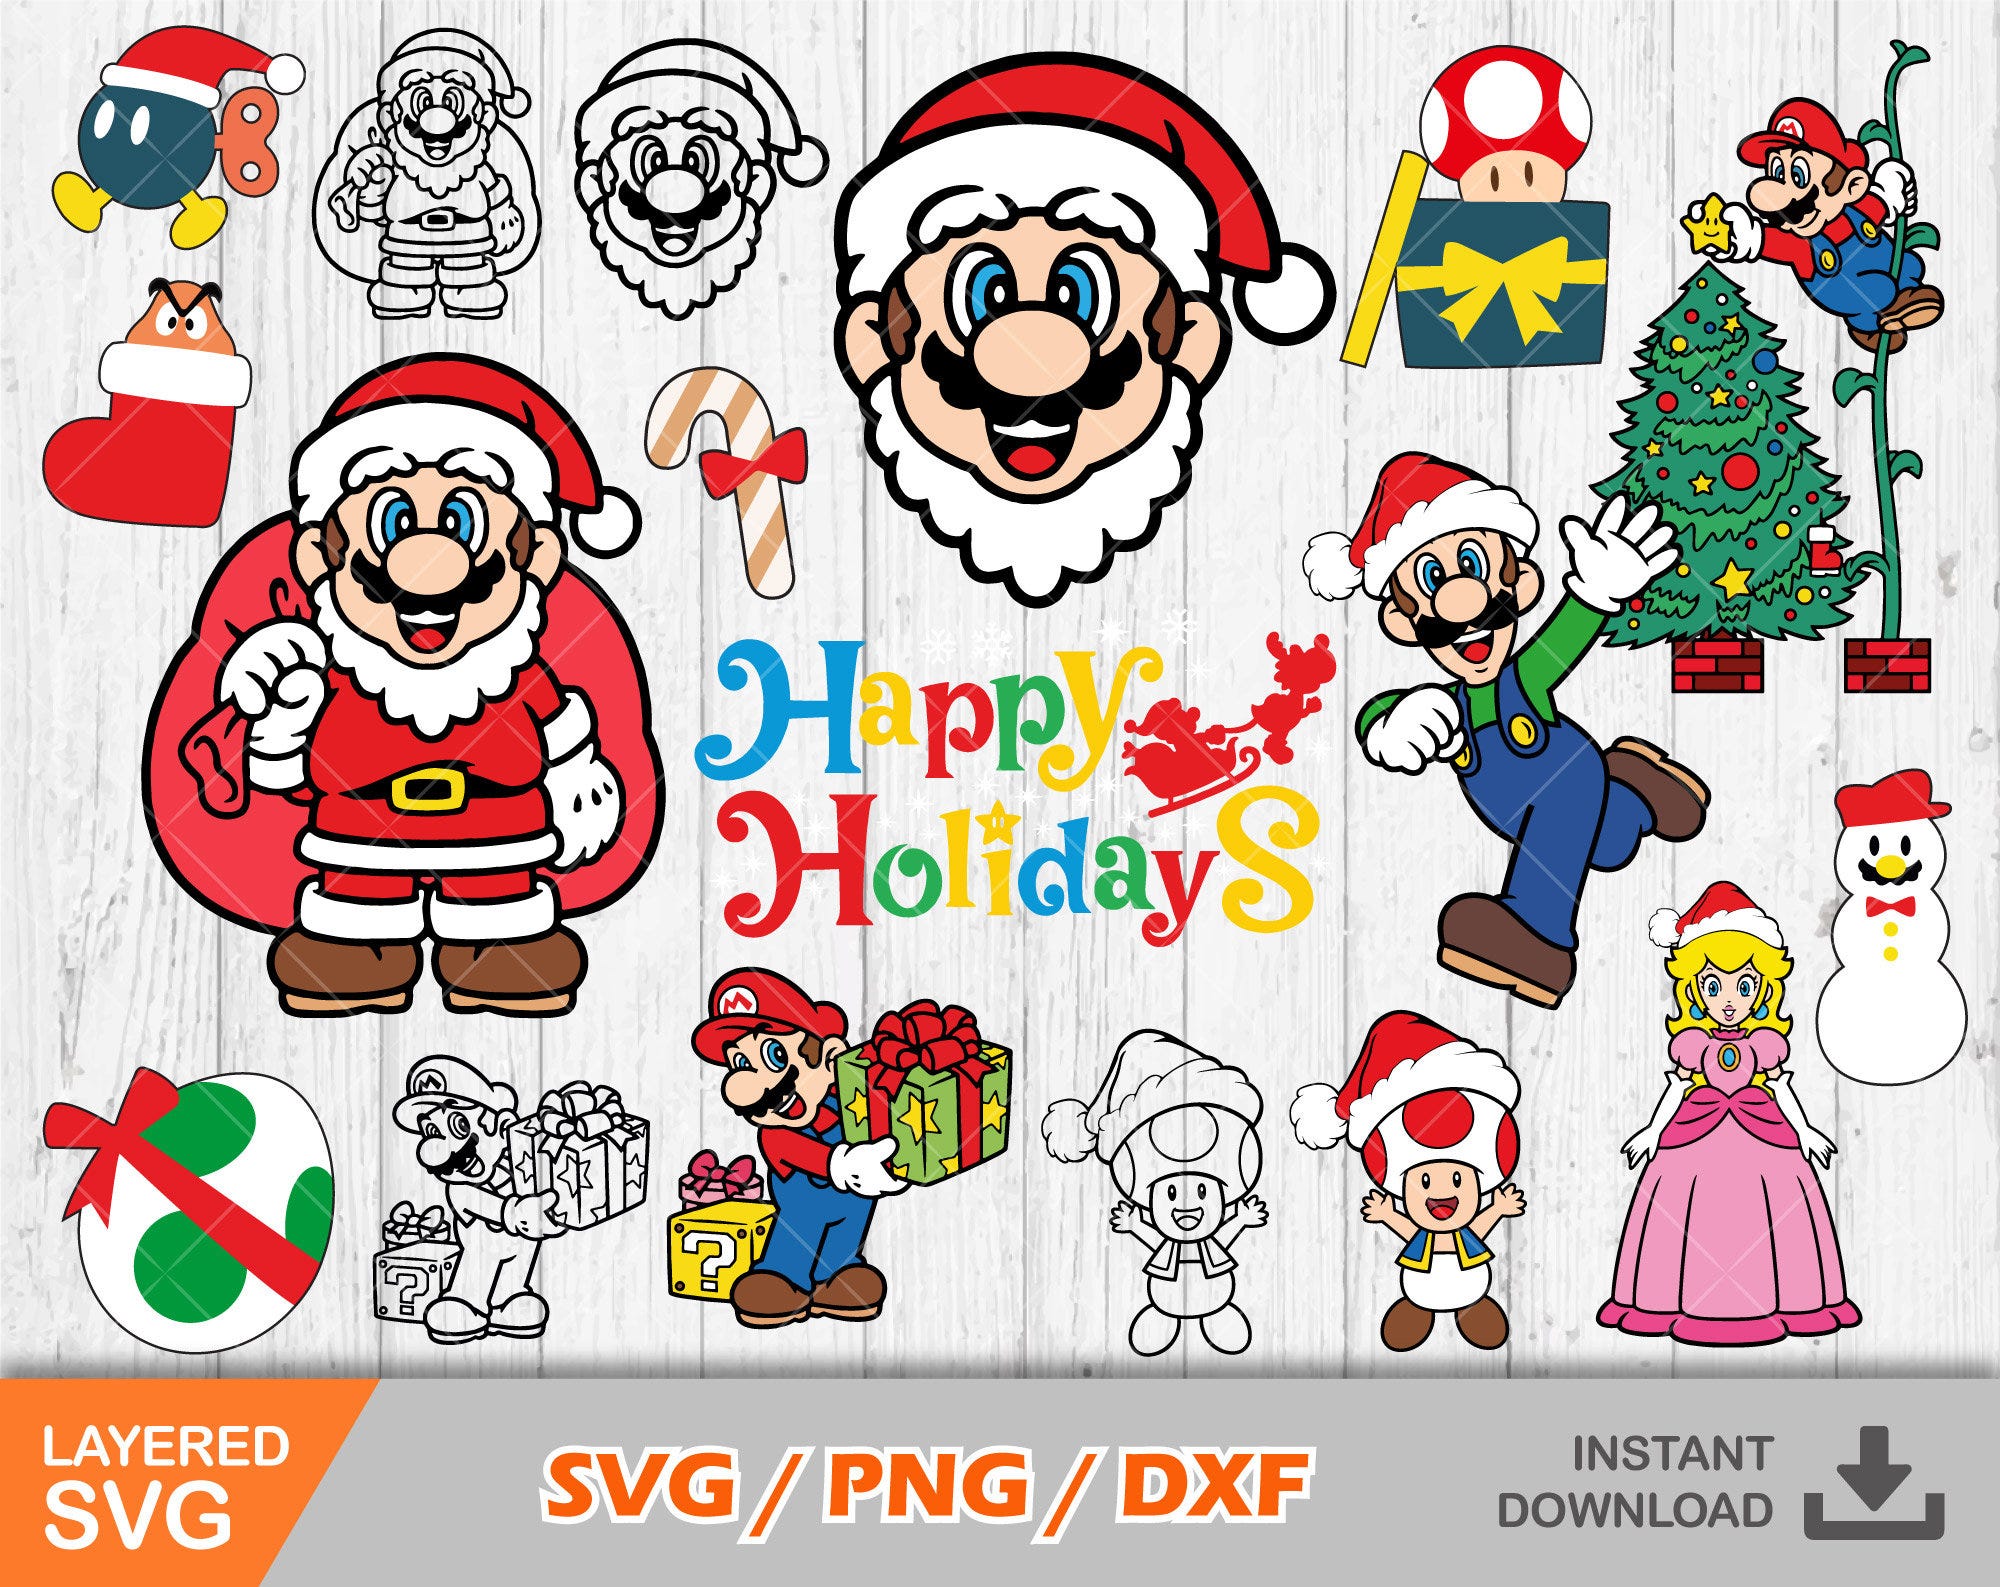 Mario Christmas clipart bundle, Christmas svg cut files for Cricut / Silhouette, Mario svg, png, dxf, instant download